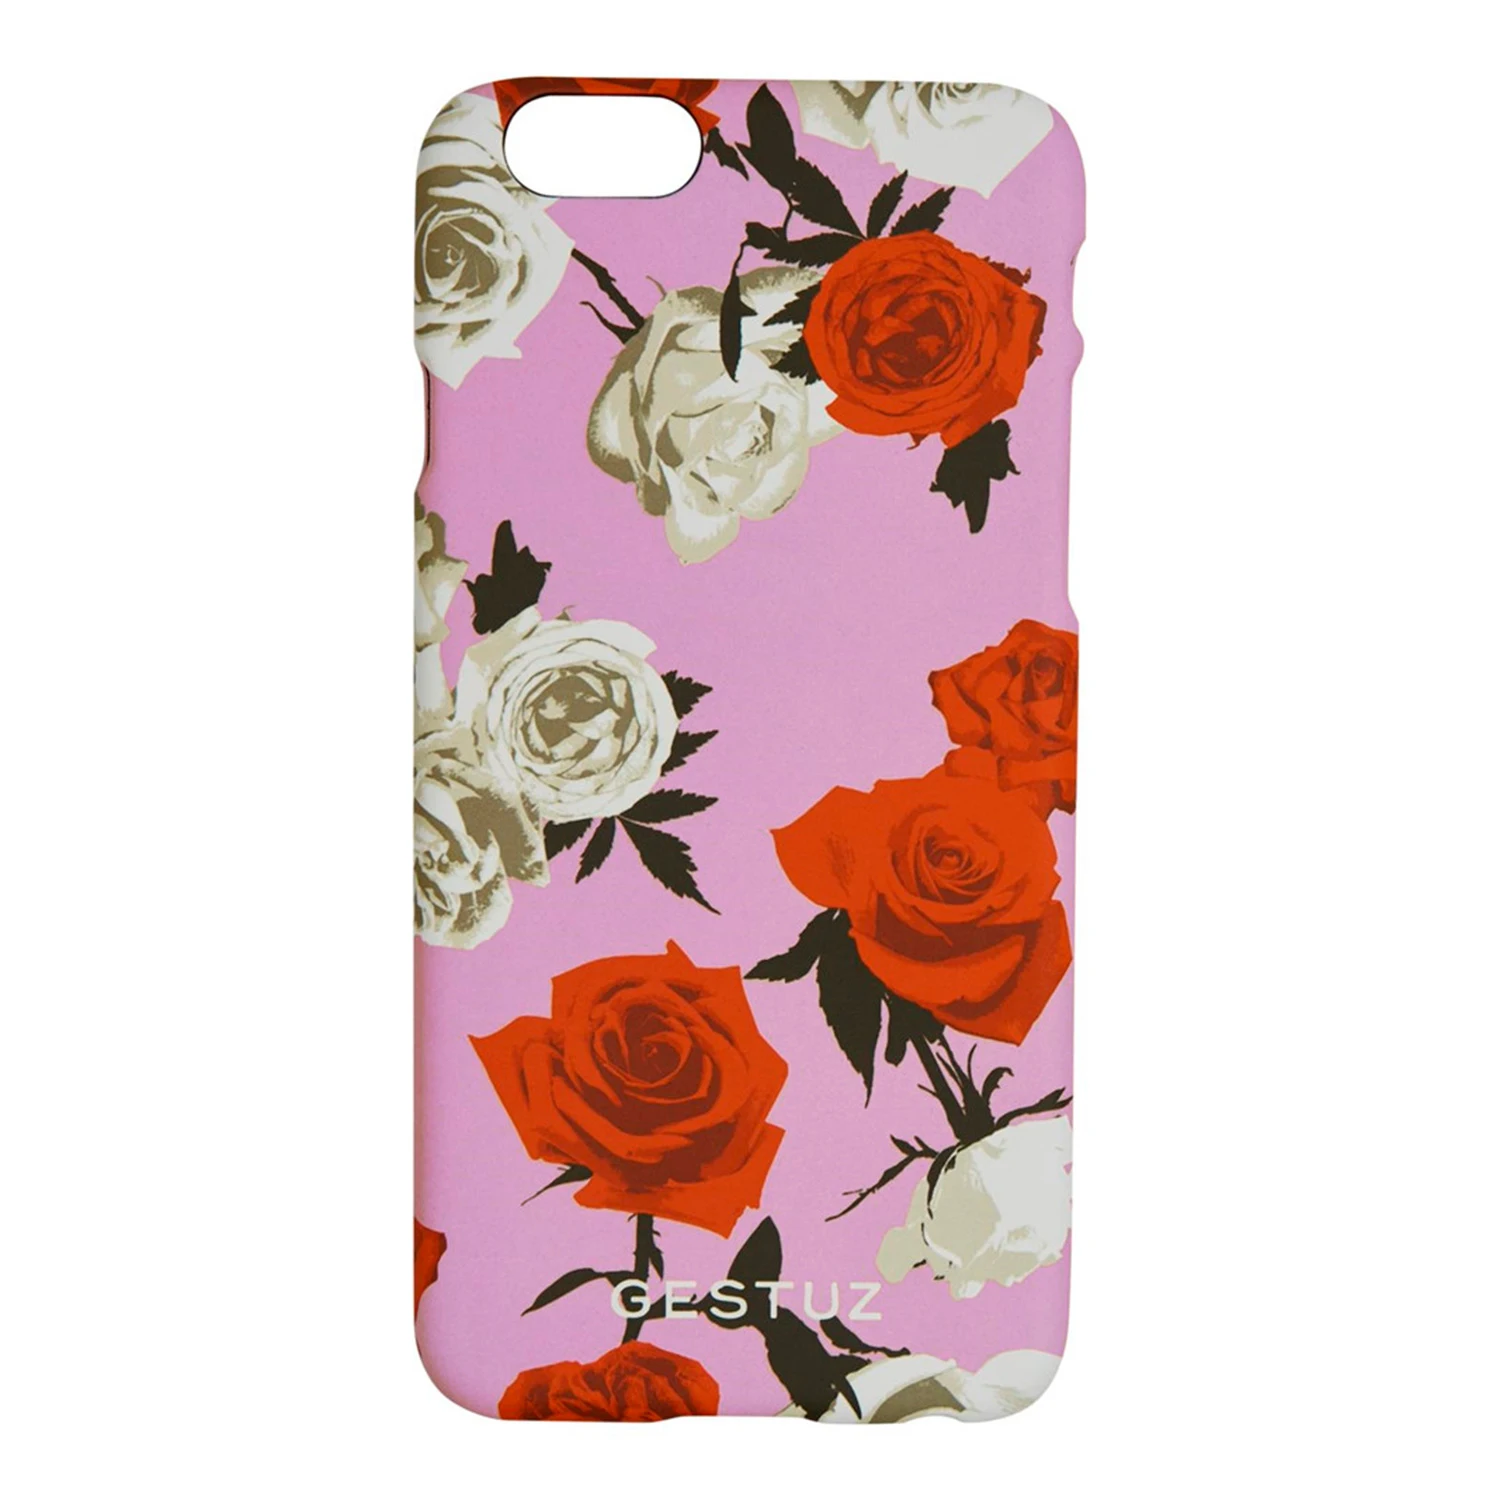 iPhone- iPad-covers - Se hele vores her